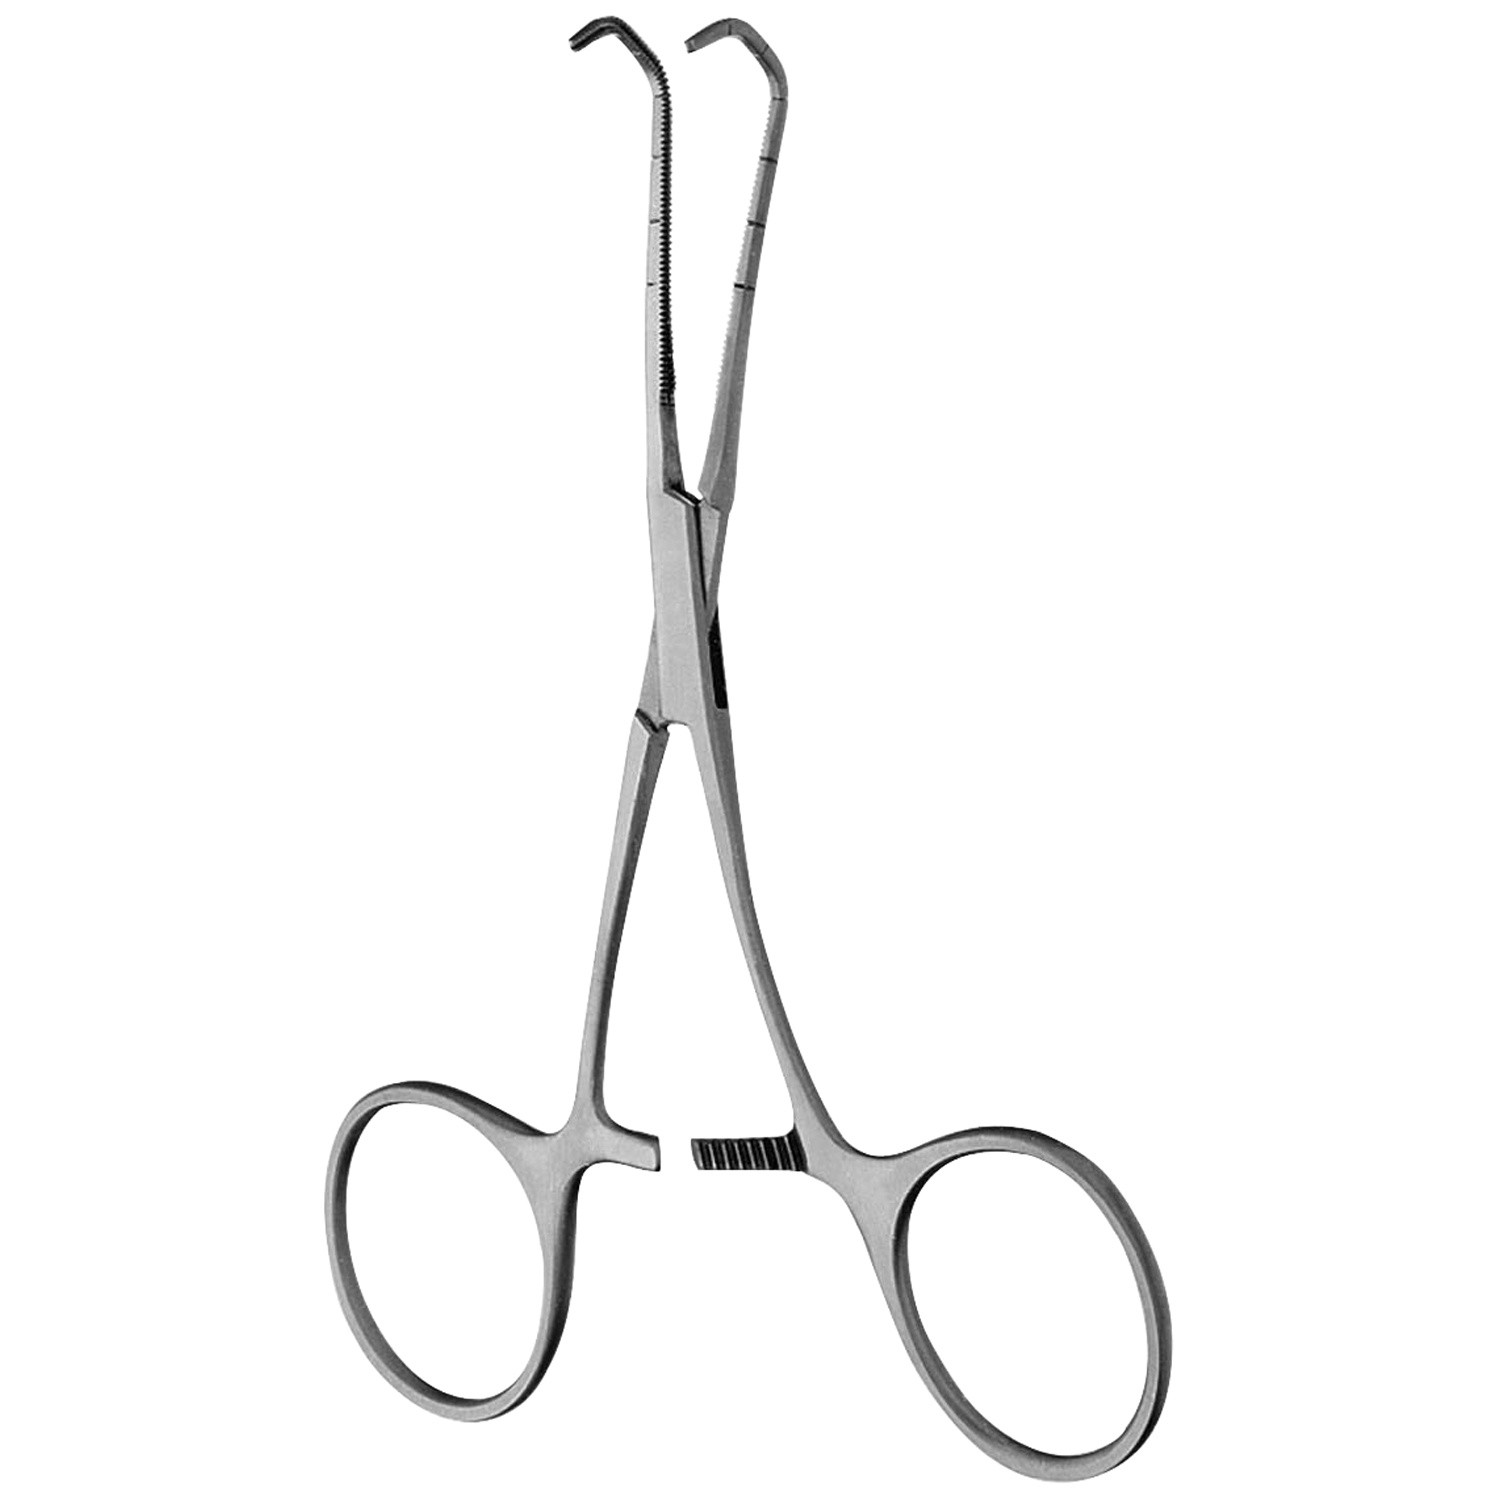 Cooley Vascular Clamp, Angled Shanks, Jaws Calibrated At 5.0 Mm Intervals, 6 1/2" (16.5 Cm), 60 Degree Angle, Large Jaws